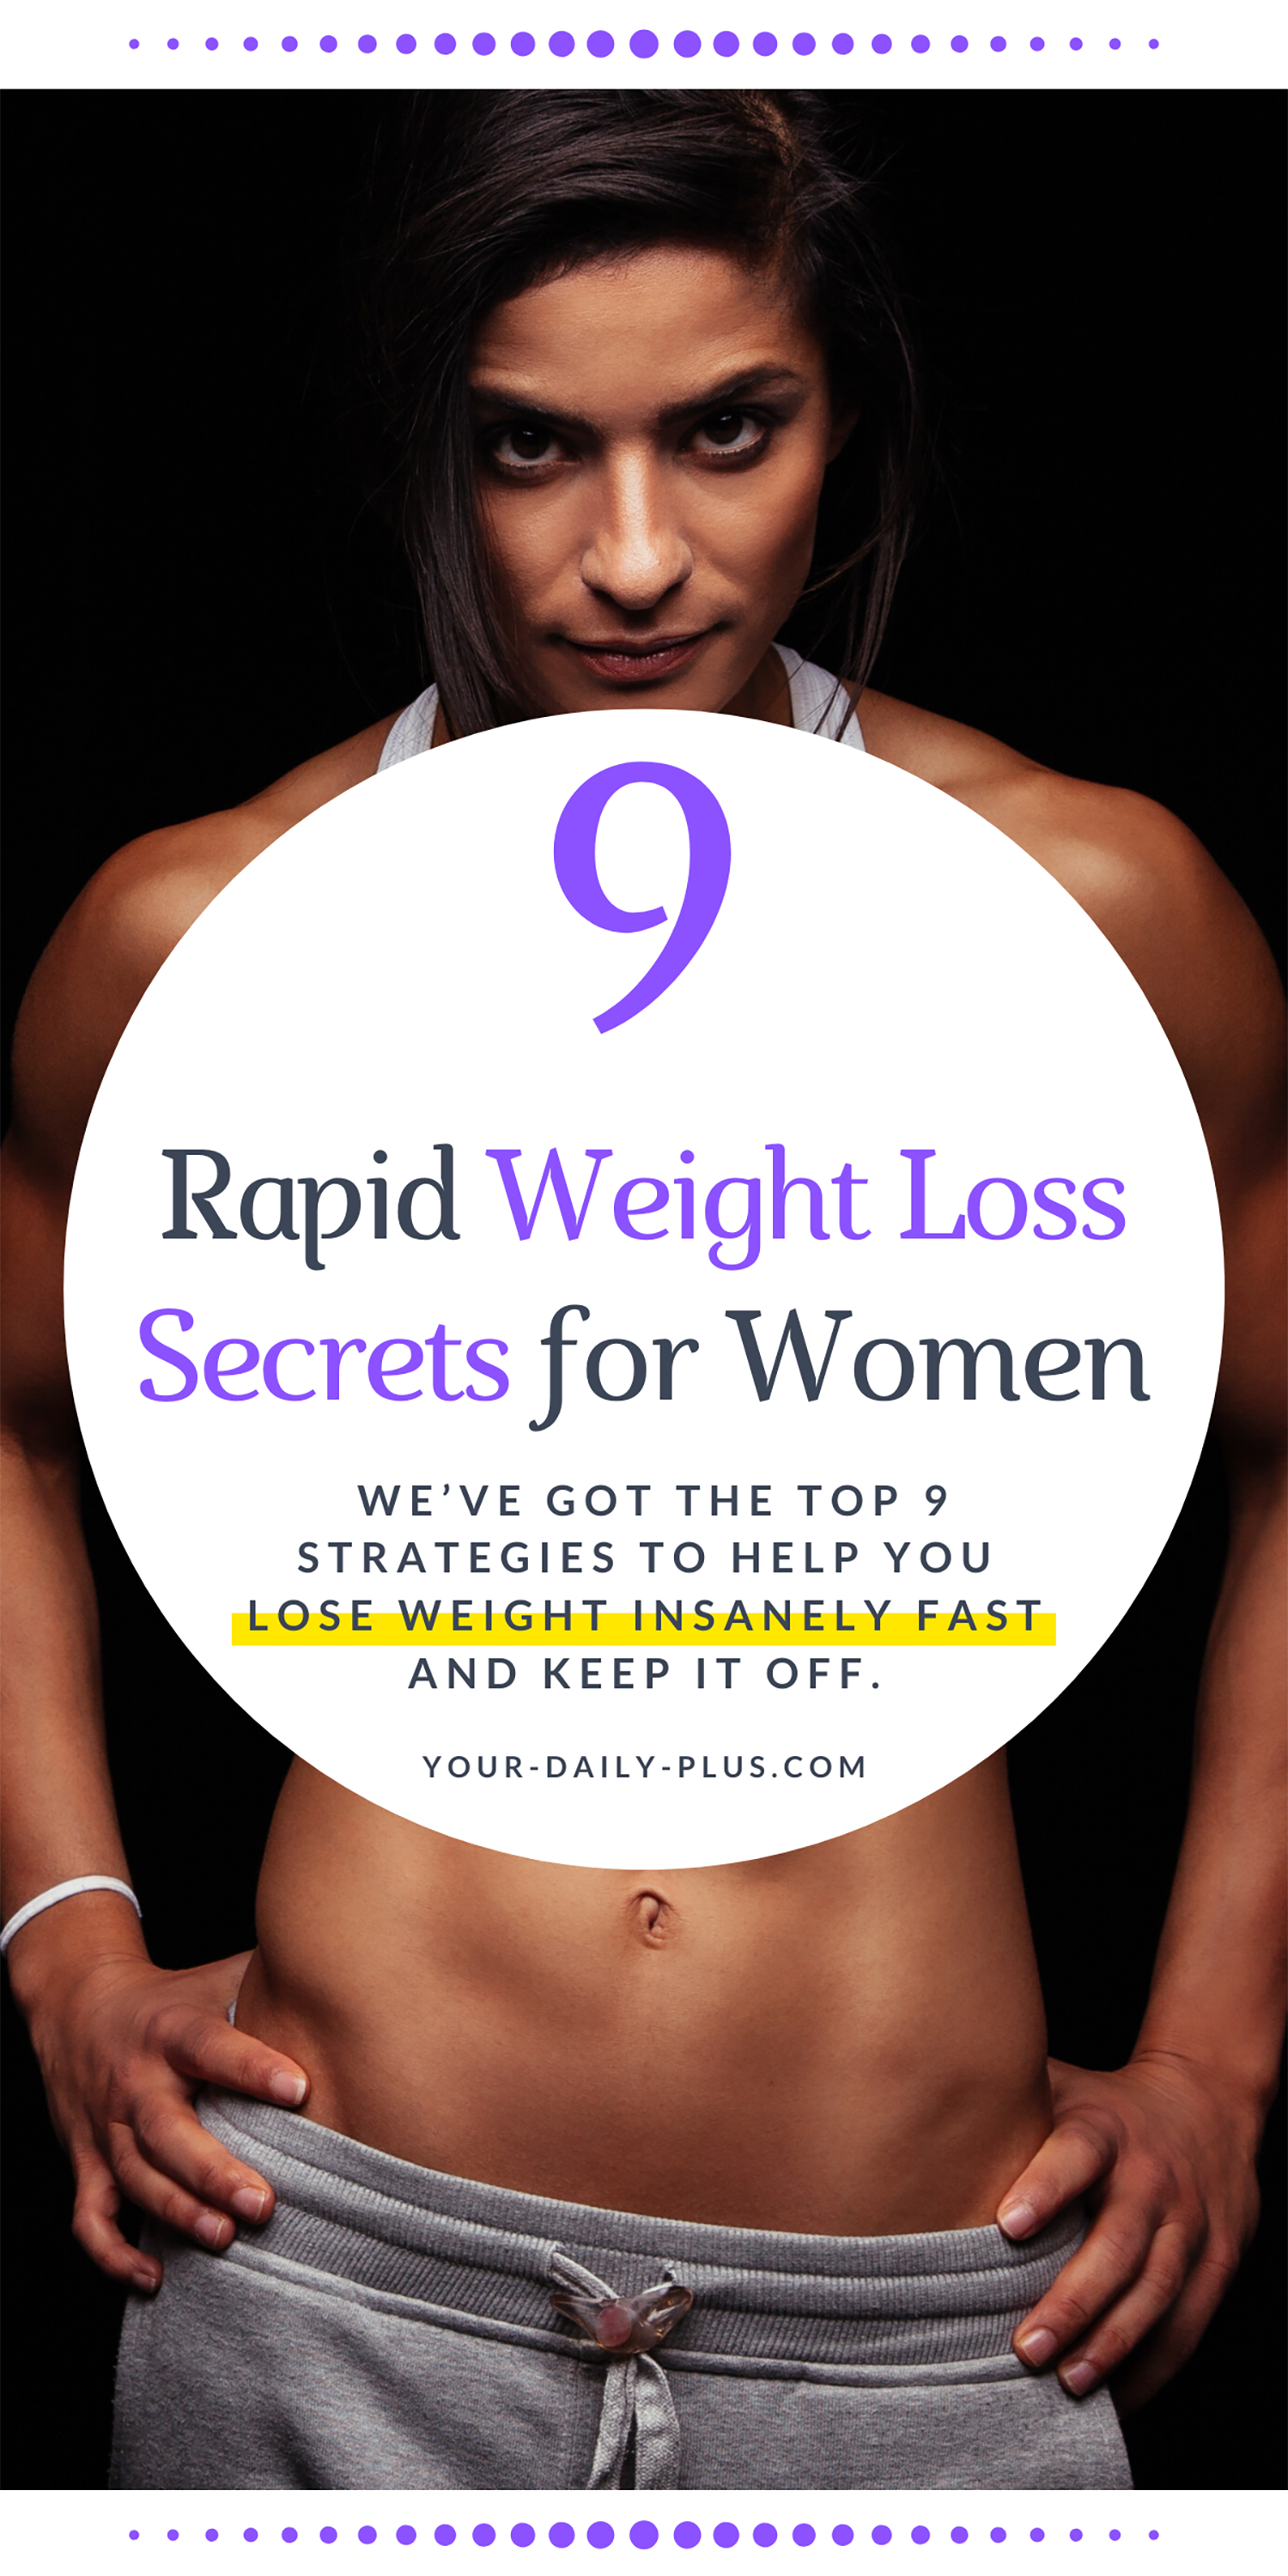 We’ve put together 9 secret strategies that we guarantee to promote rapid weight loss and improve your health. #healthy #fitness #weightloss